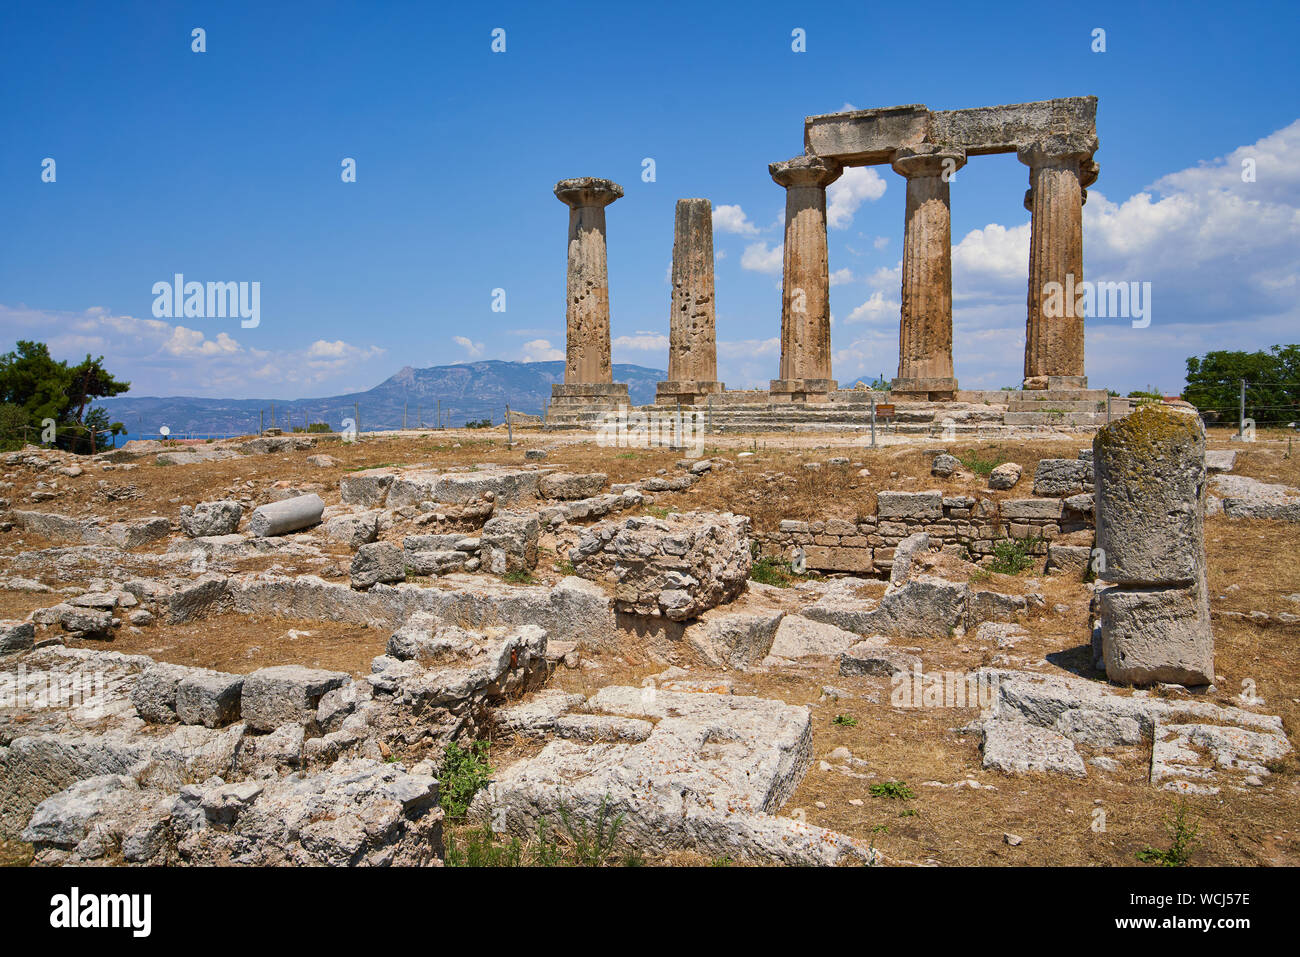 The Ruins Of The Th Century Doric Temple Of Apollo In Ancient Corinth In Greece Stock Photo Alamy